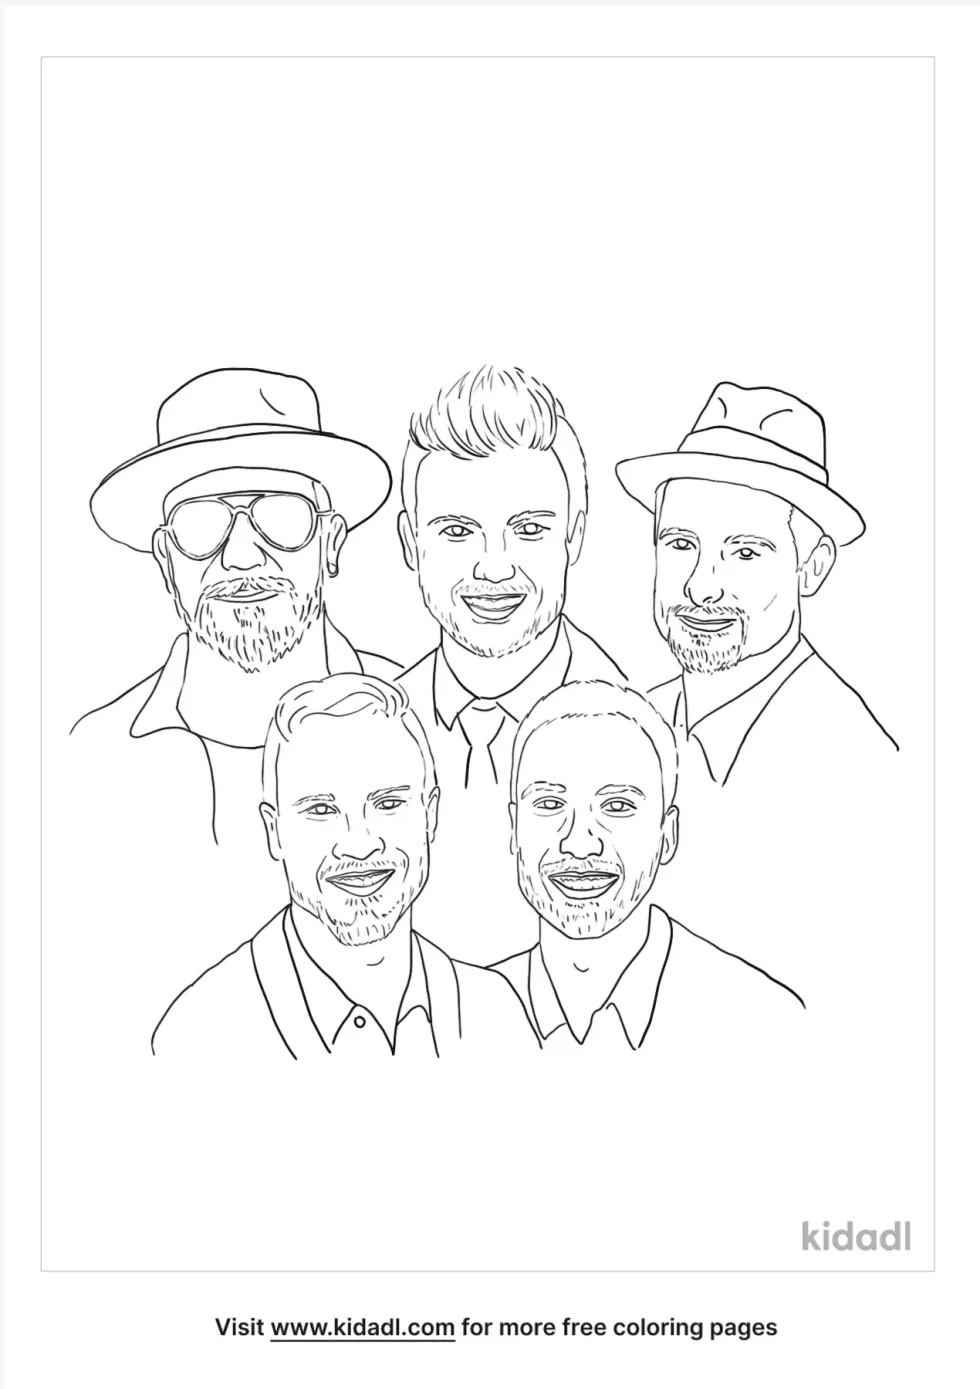 Bsb Coloring Page